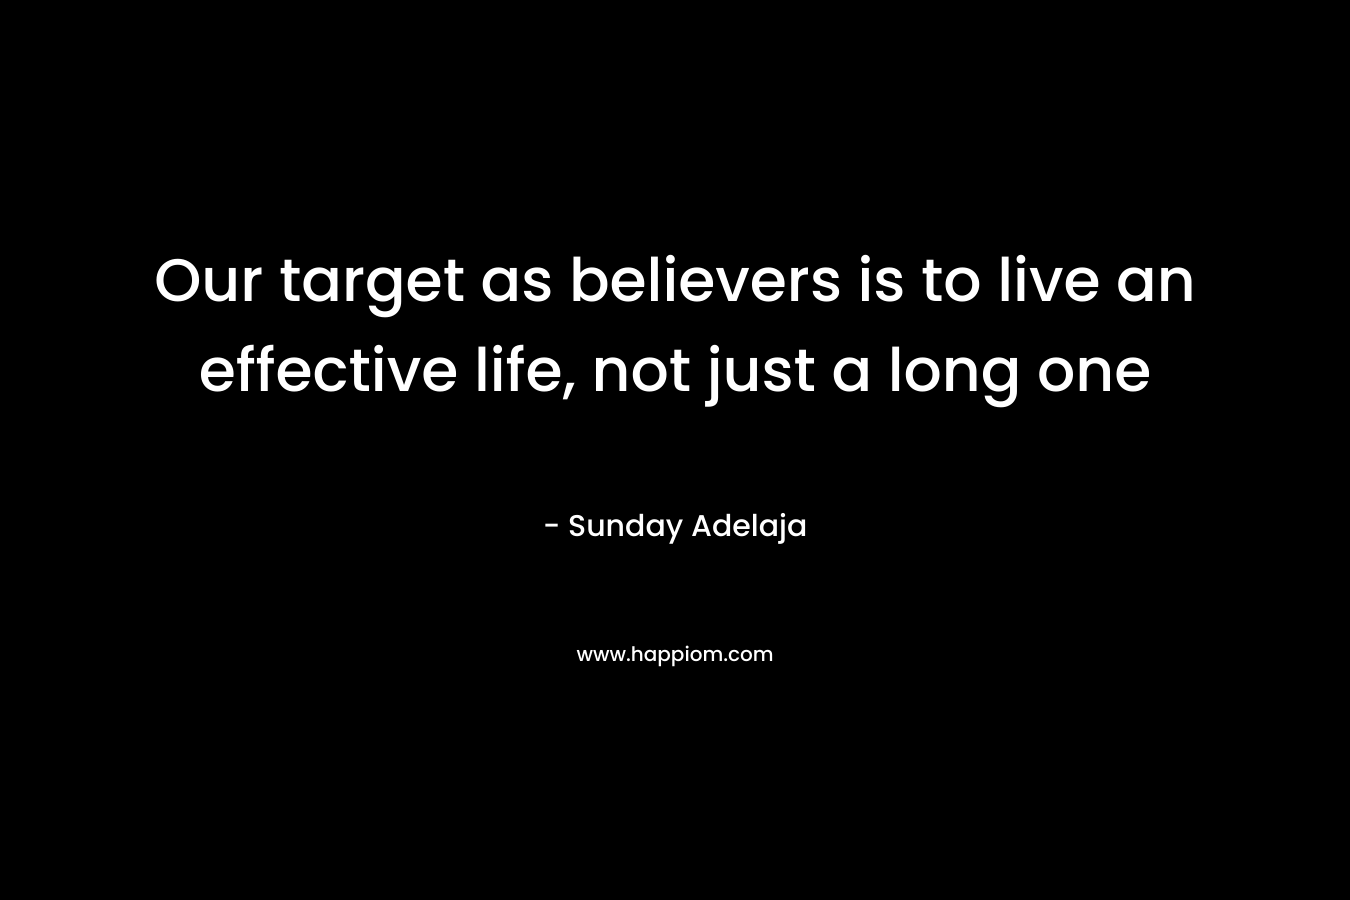 Our target as believers is to live an effective life, not just a long one